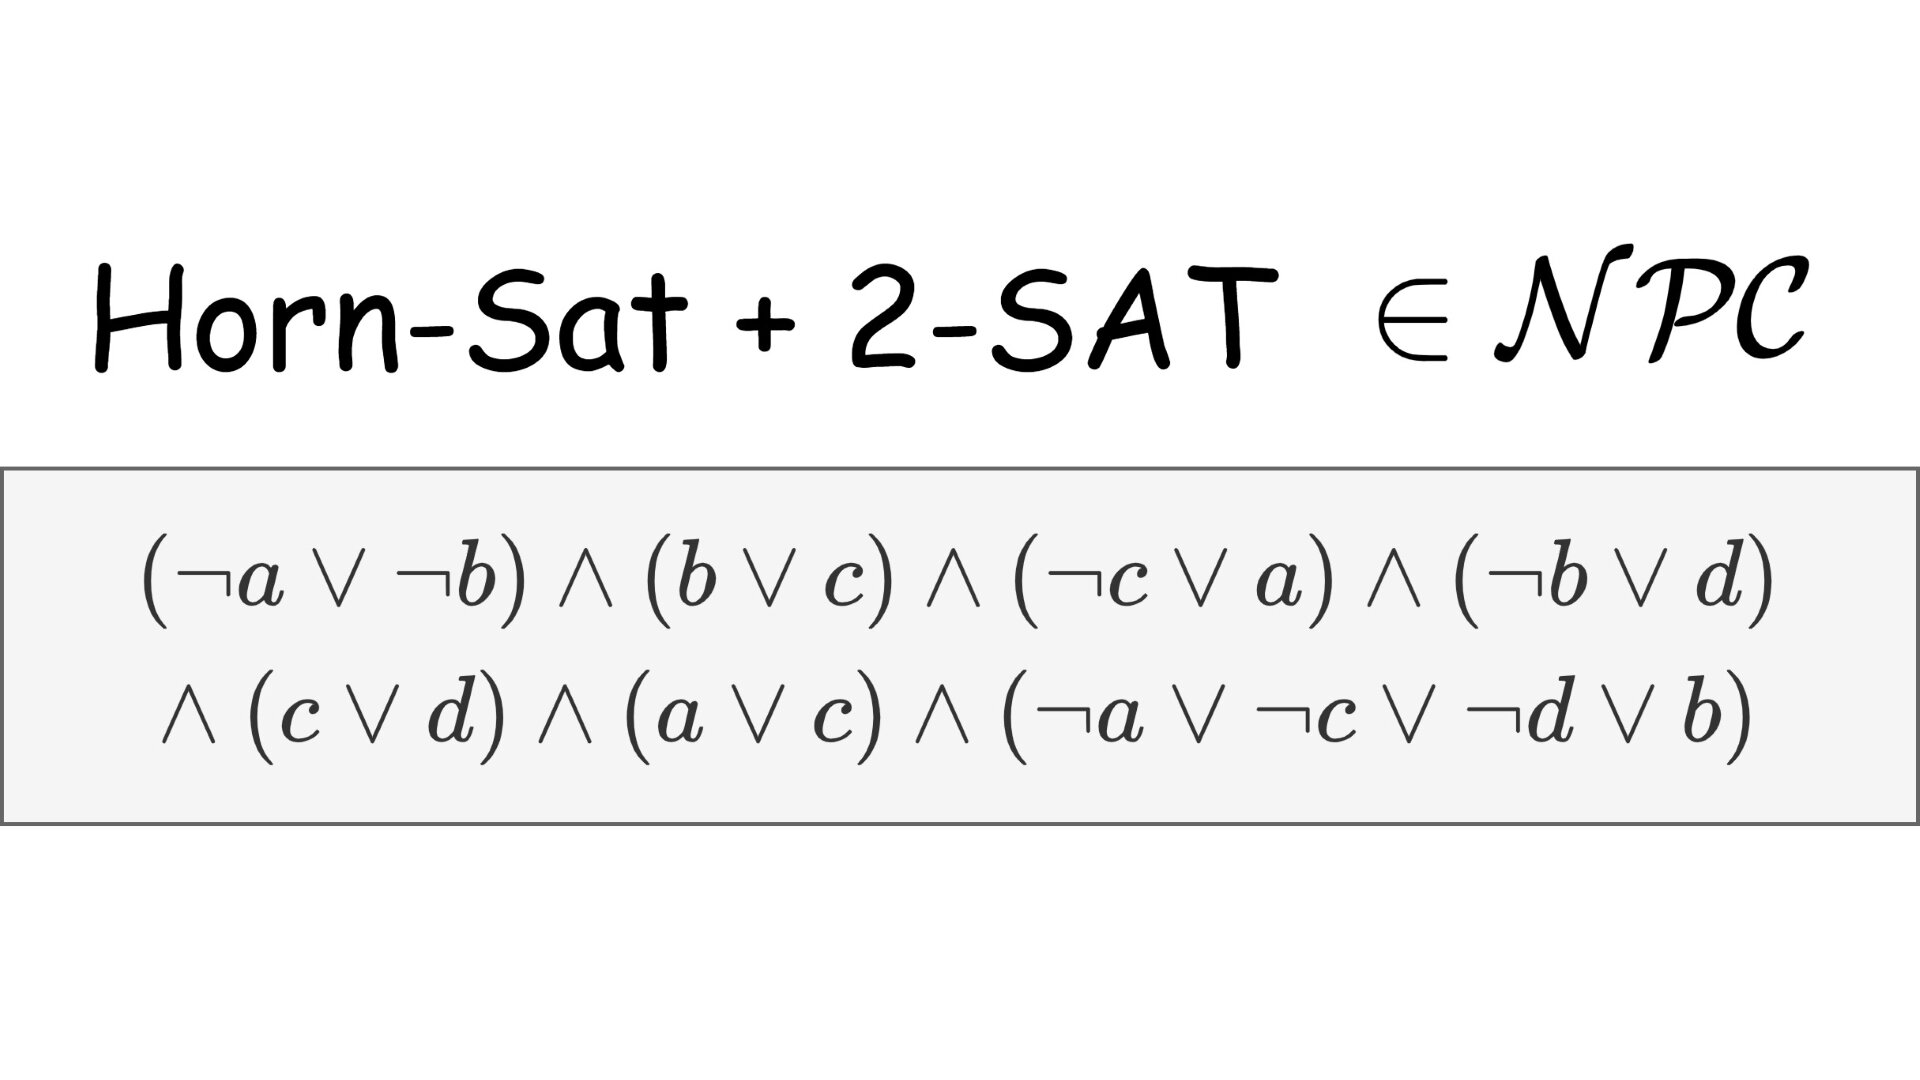 Satisfiability of formulas with both Horn and 2-SAT clauses is NP-Complete